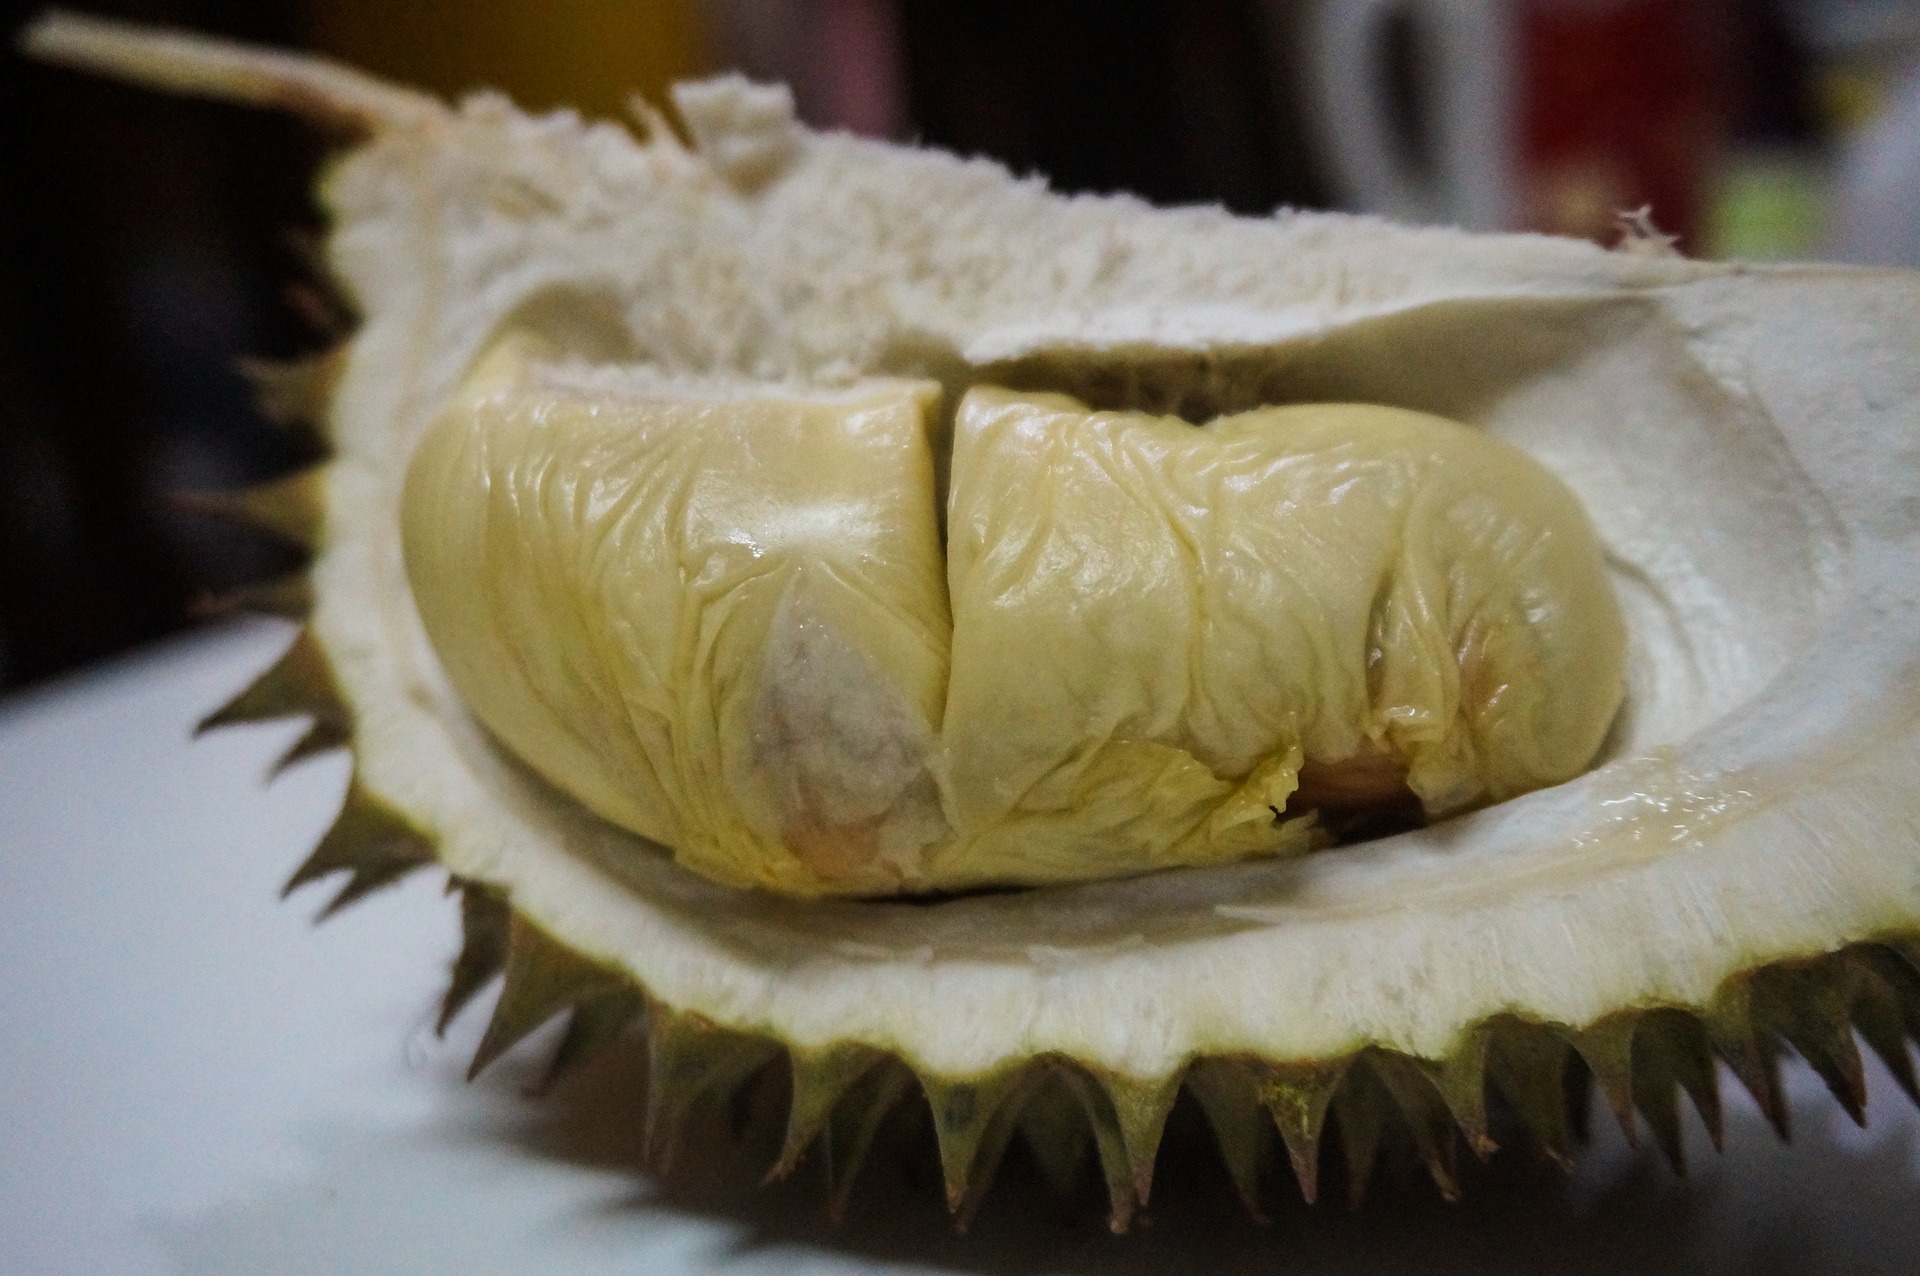 durian smelly fruit